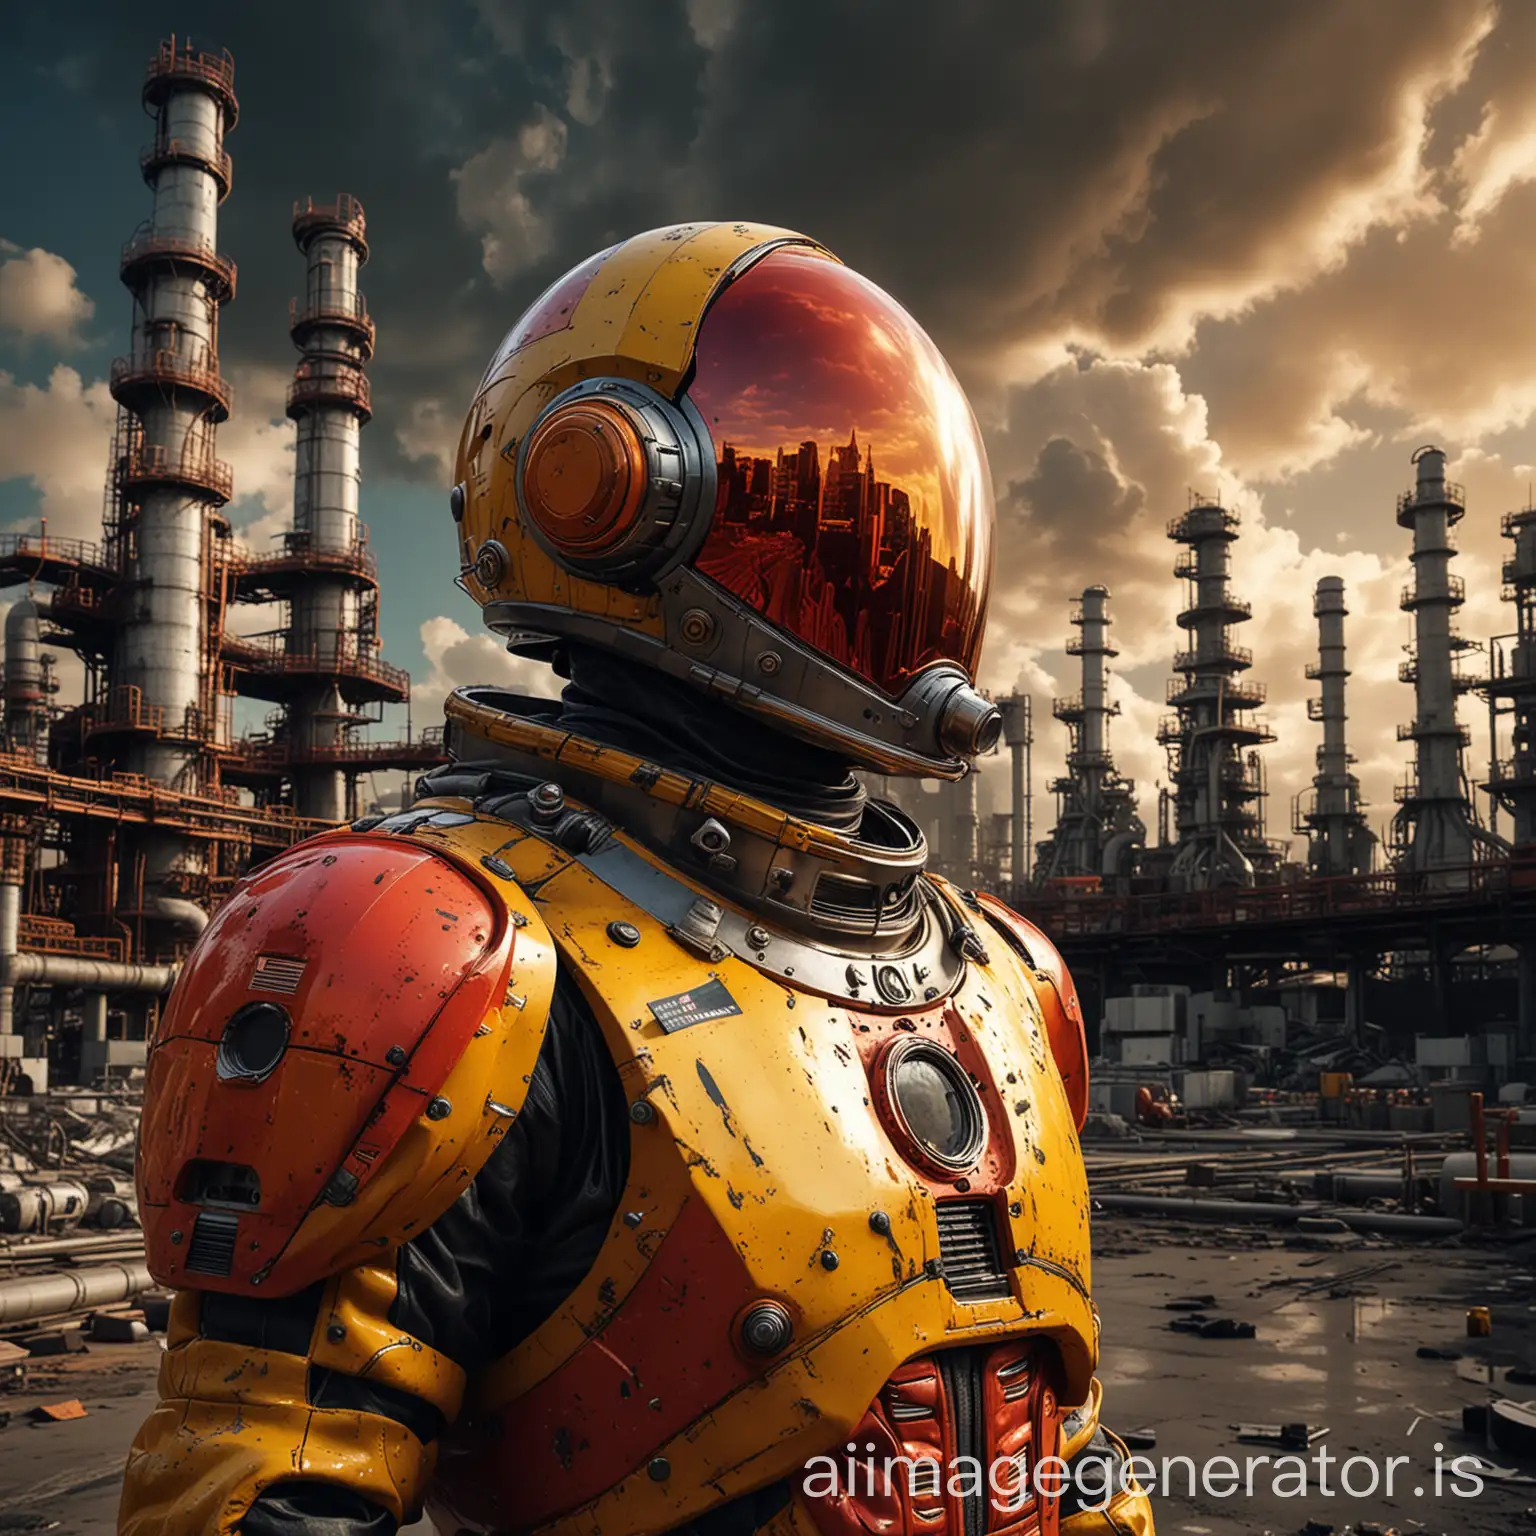 A captivating, superdetailed photograph with intense colors that combine both surreal and industrial elements. In the foreground, a close-up of a futuristic space suit helmet showcases intricate designs and vivid red and acid yellow accents. The background reveals a complex scene of concrete skyscrapers and distillation petrochemical columns, with black clouds swirling around the sky. The image is enhanced with the PL photo filter, and the ray tracing global illumination technique adds a sense of depth and realism. The optics, scattering, and glow effects create a surreal atmosphere, making this photo both visually stunning and thought-provoking.